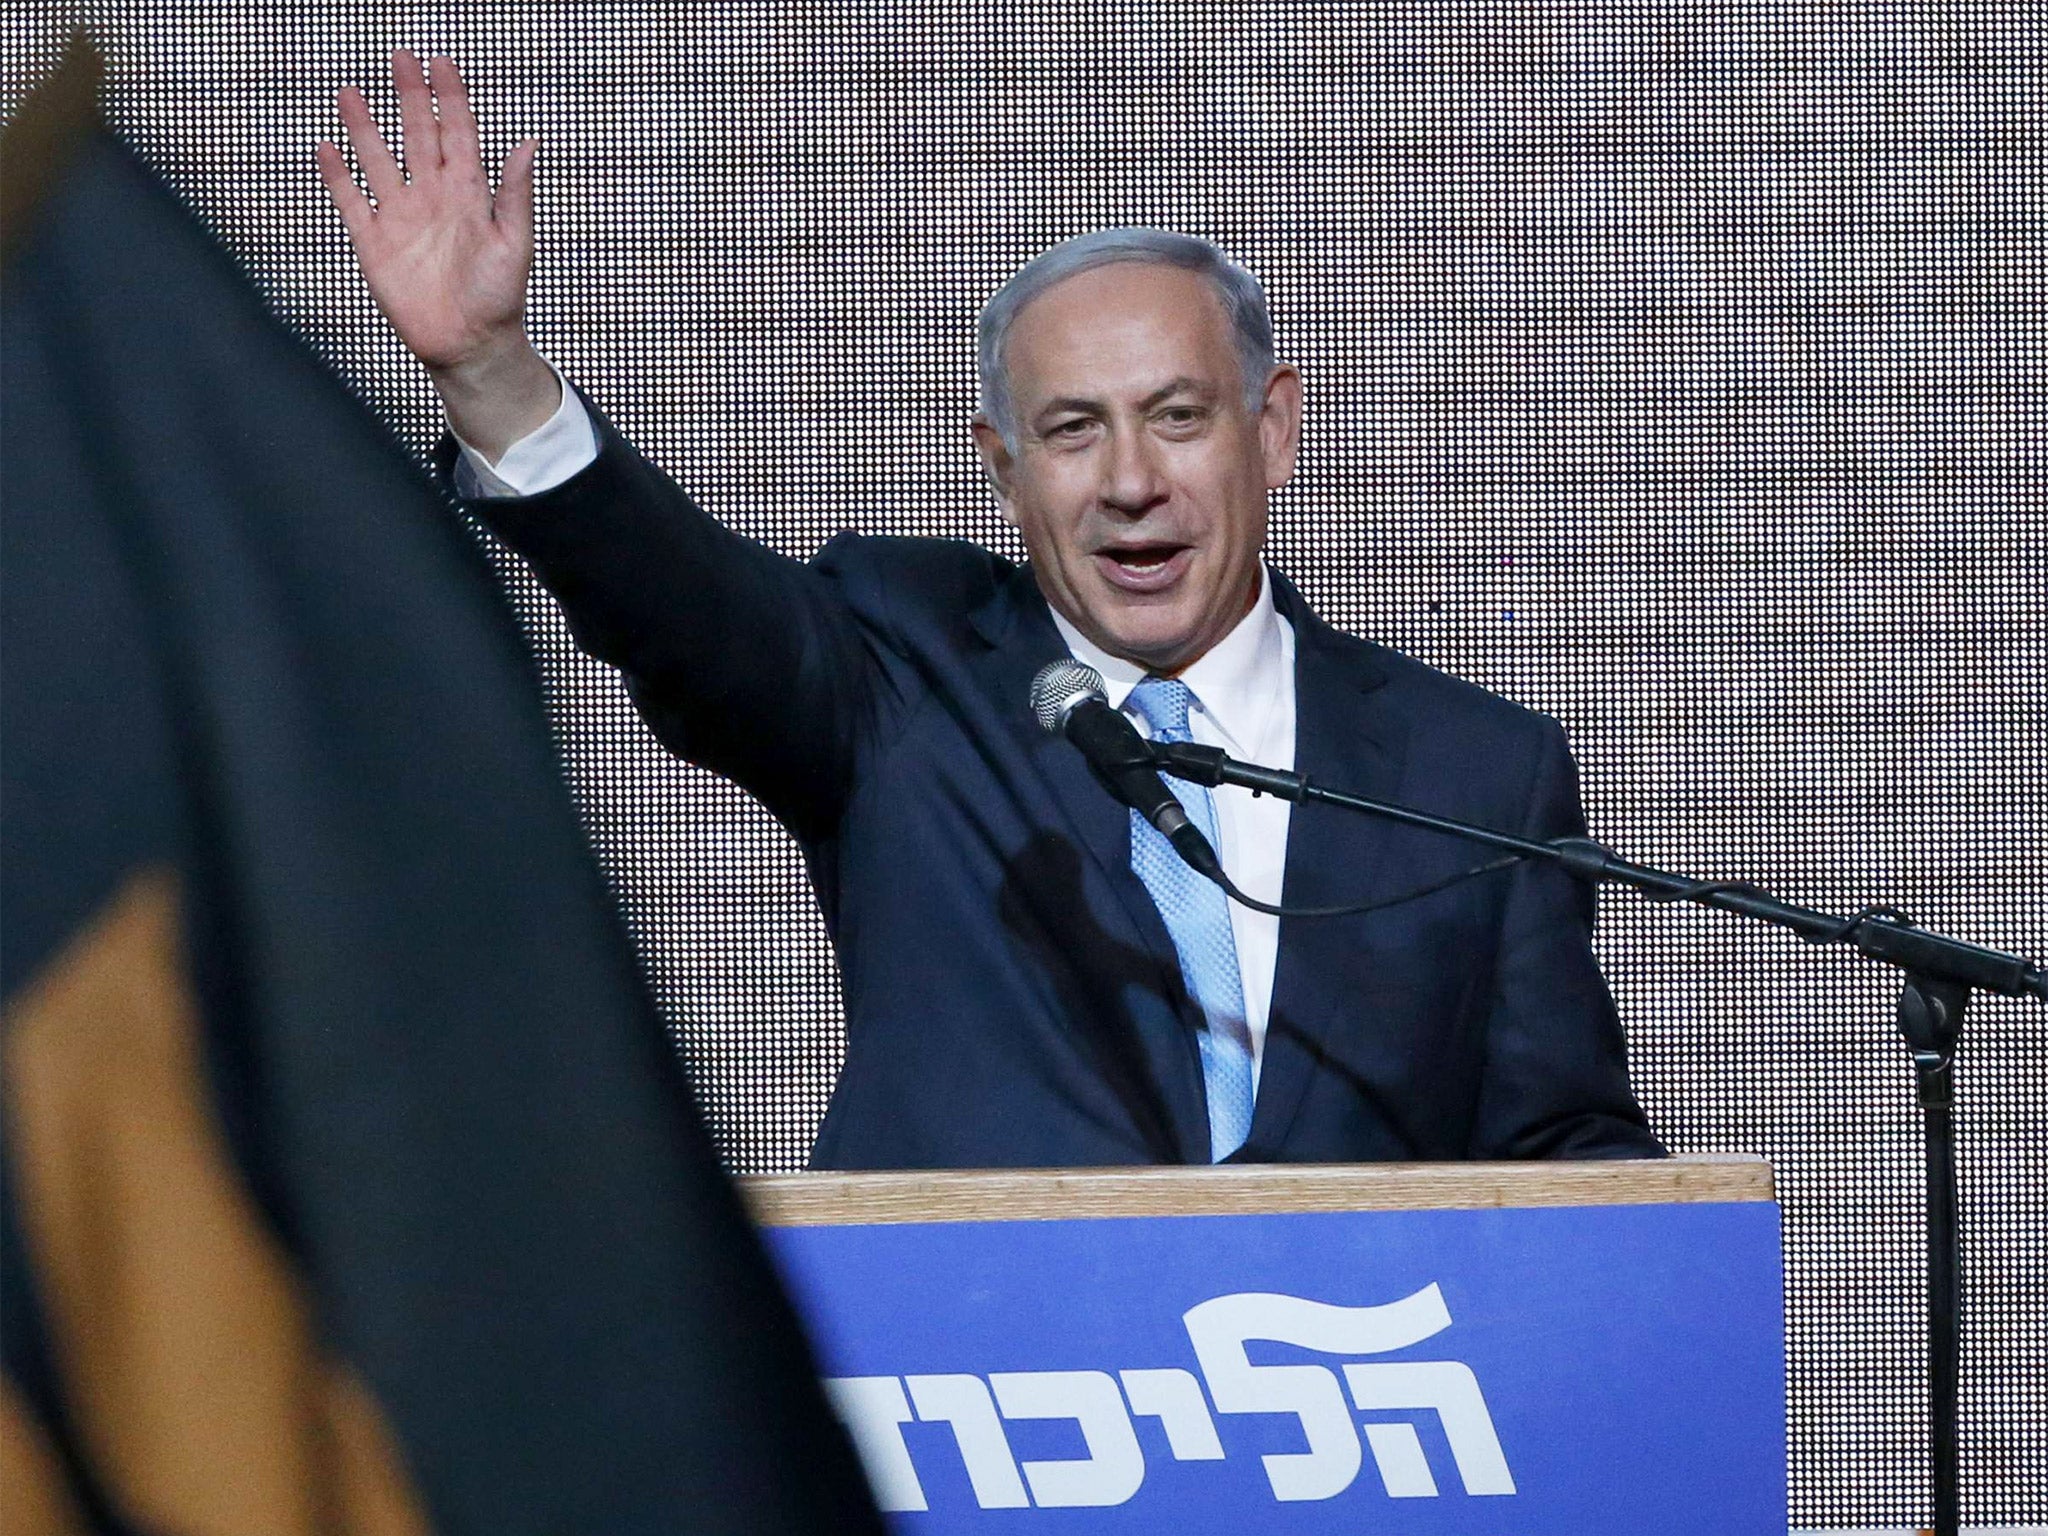 Netanyahu claimed victory in Israel's election on Tuesday night